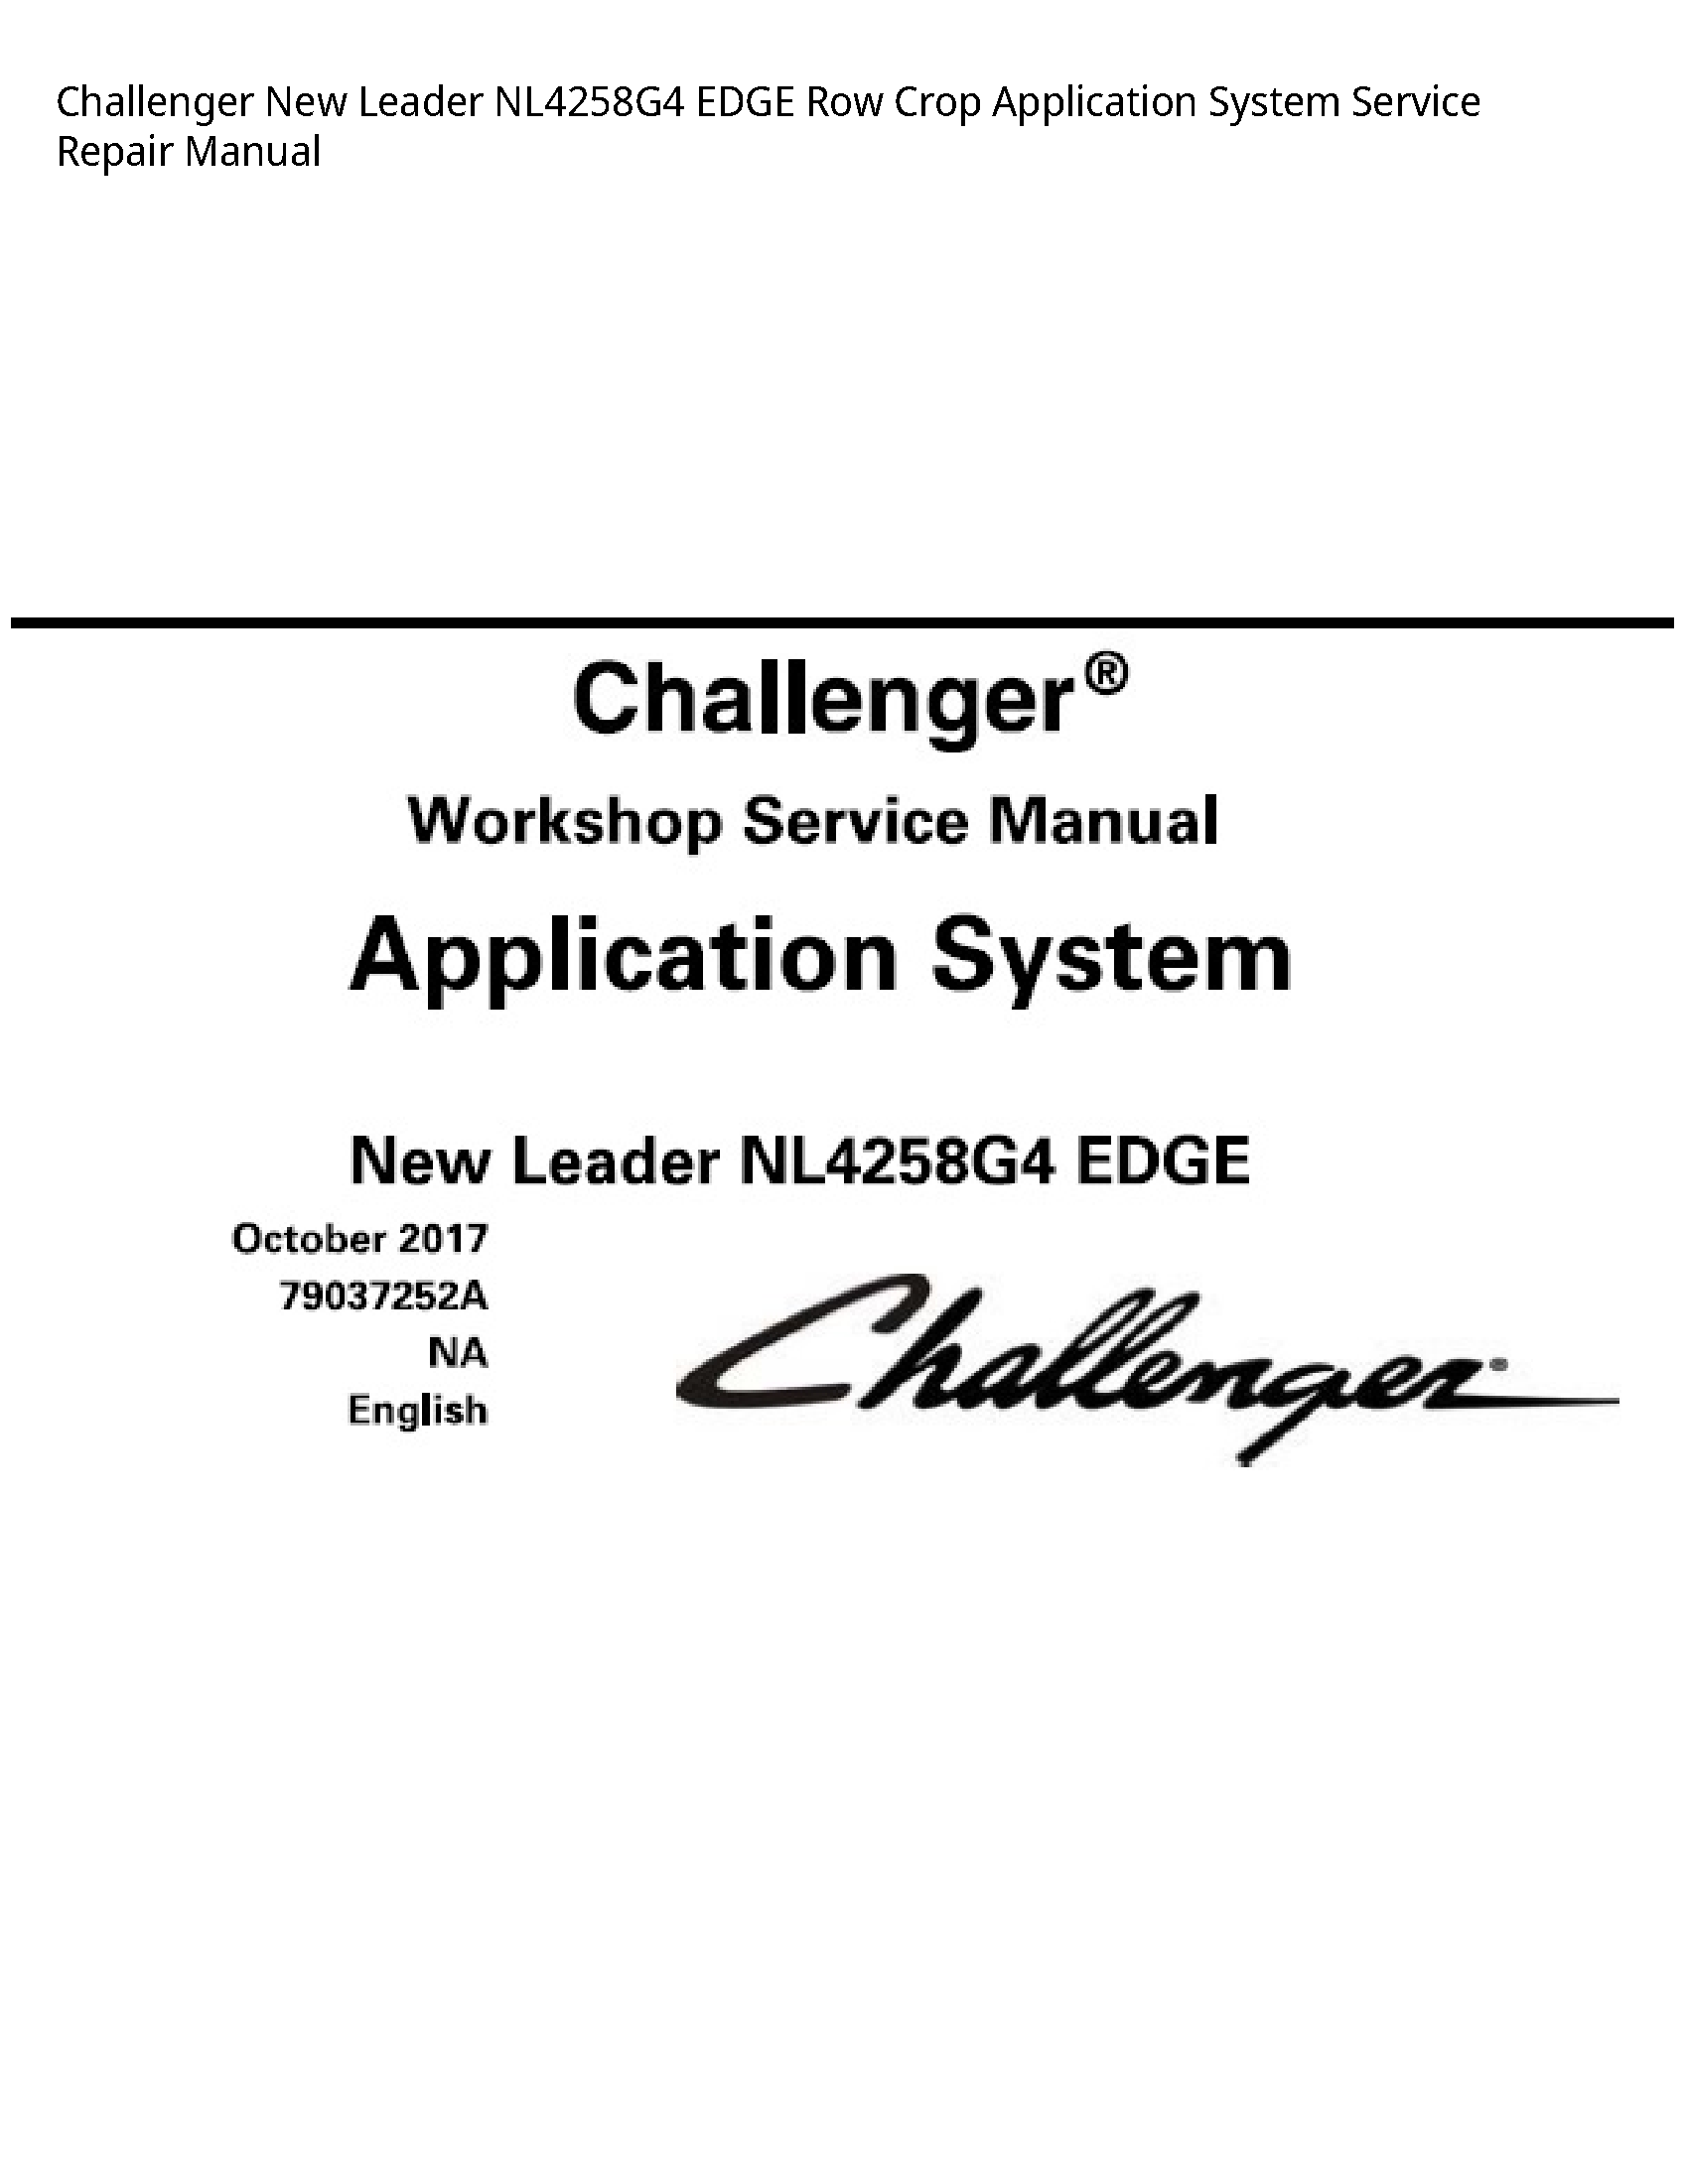 Challenger NL4258G4 New Leader EDGE Row Crop Application System manual